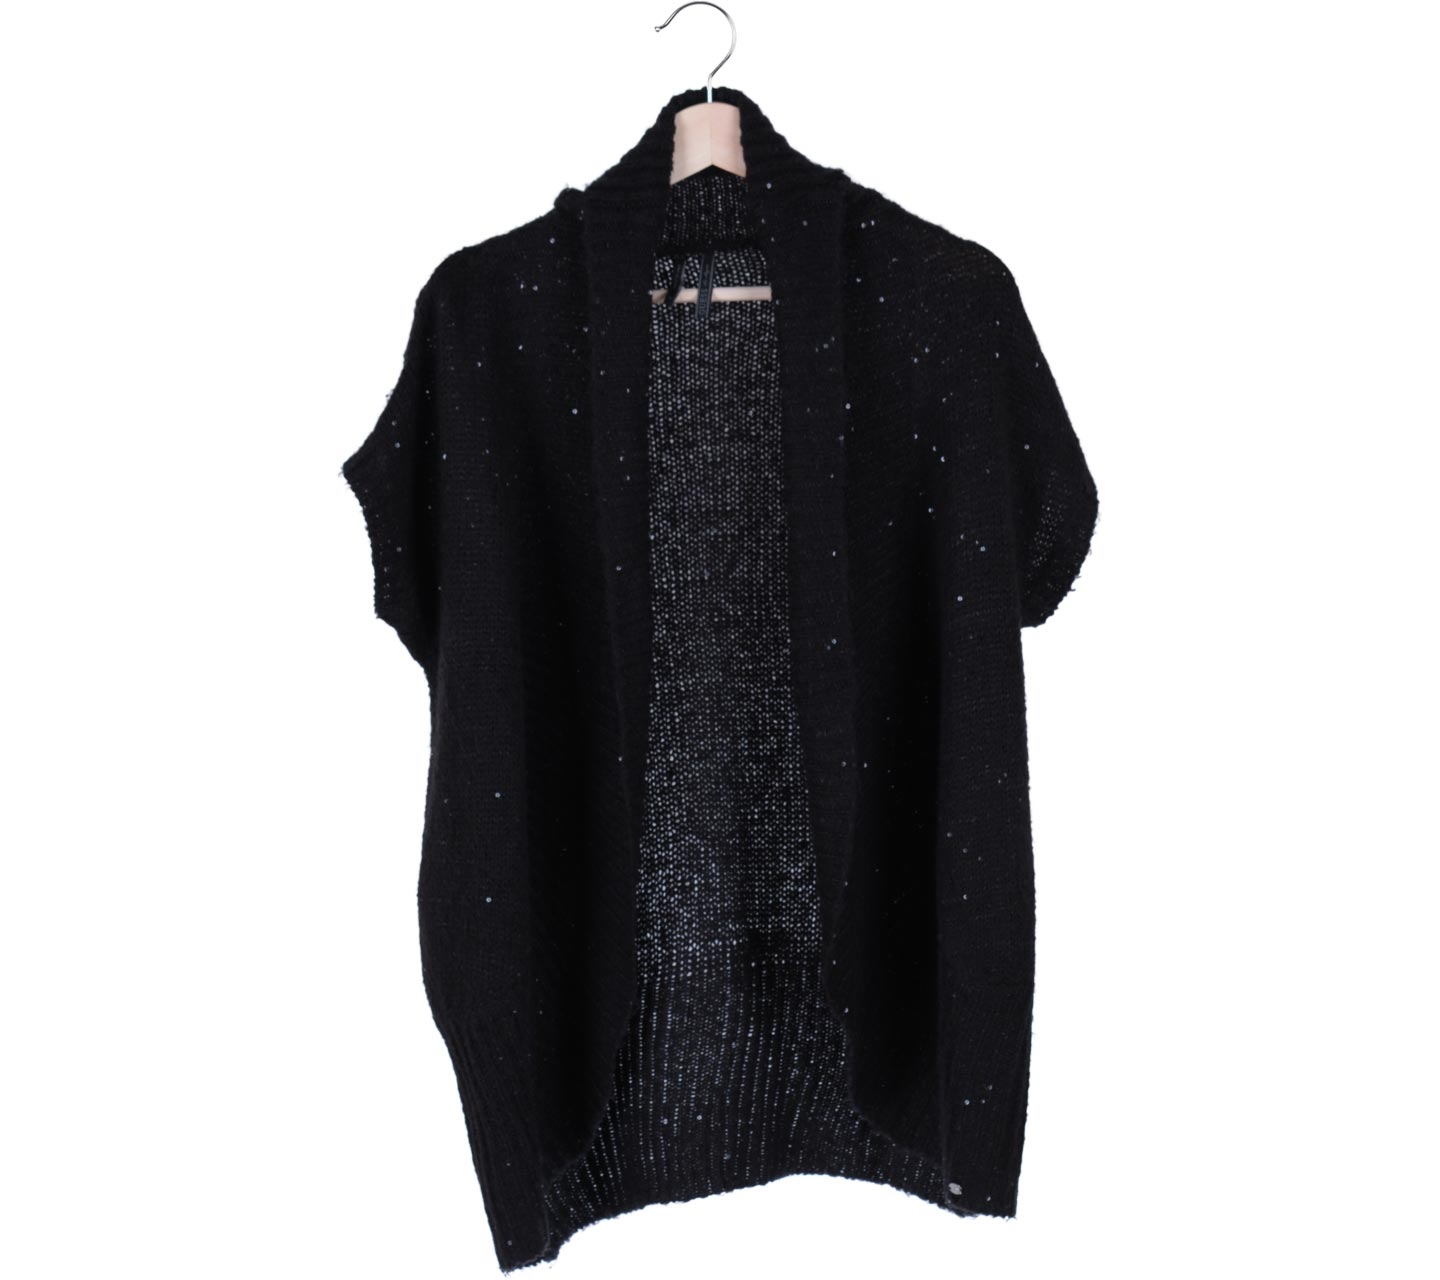 Guess Black Sequins Knitted Cardigan